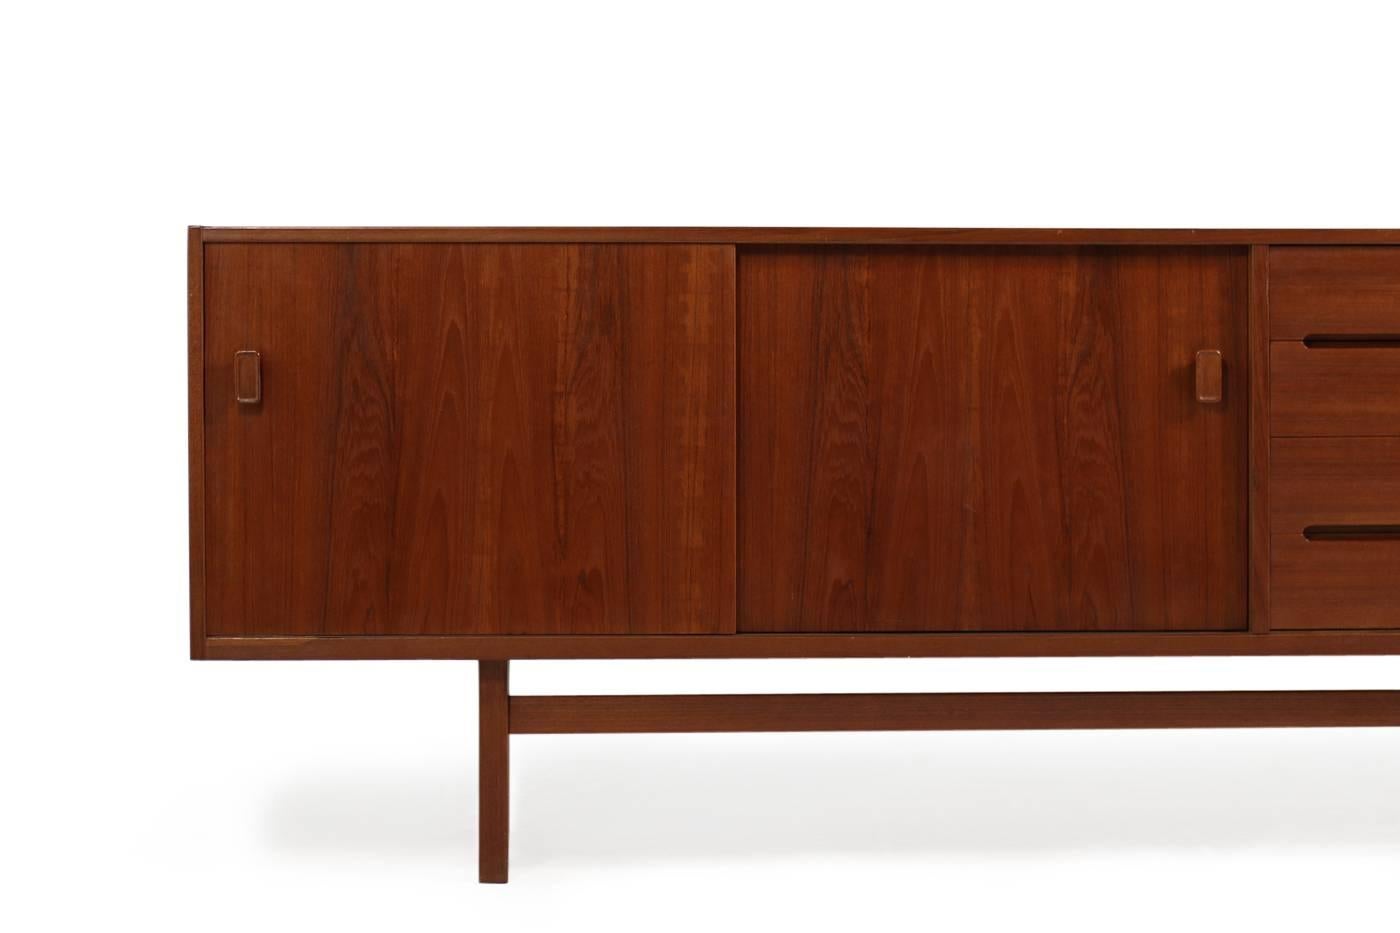 Beautiful 1960s sideboard by Nils Jonsson, very rare teak sideboard, Troeds, Made in Sweden, maple wood inside, four drawers, two sliding doors and a bar with white formica inside, height adjustable shelves inside, fantastic condition. Beautiful and